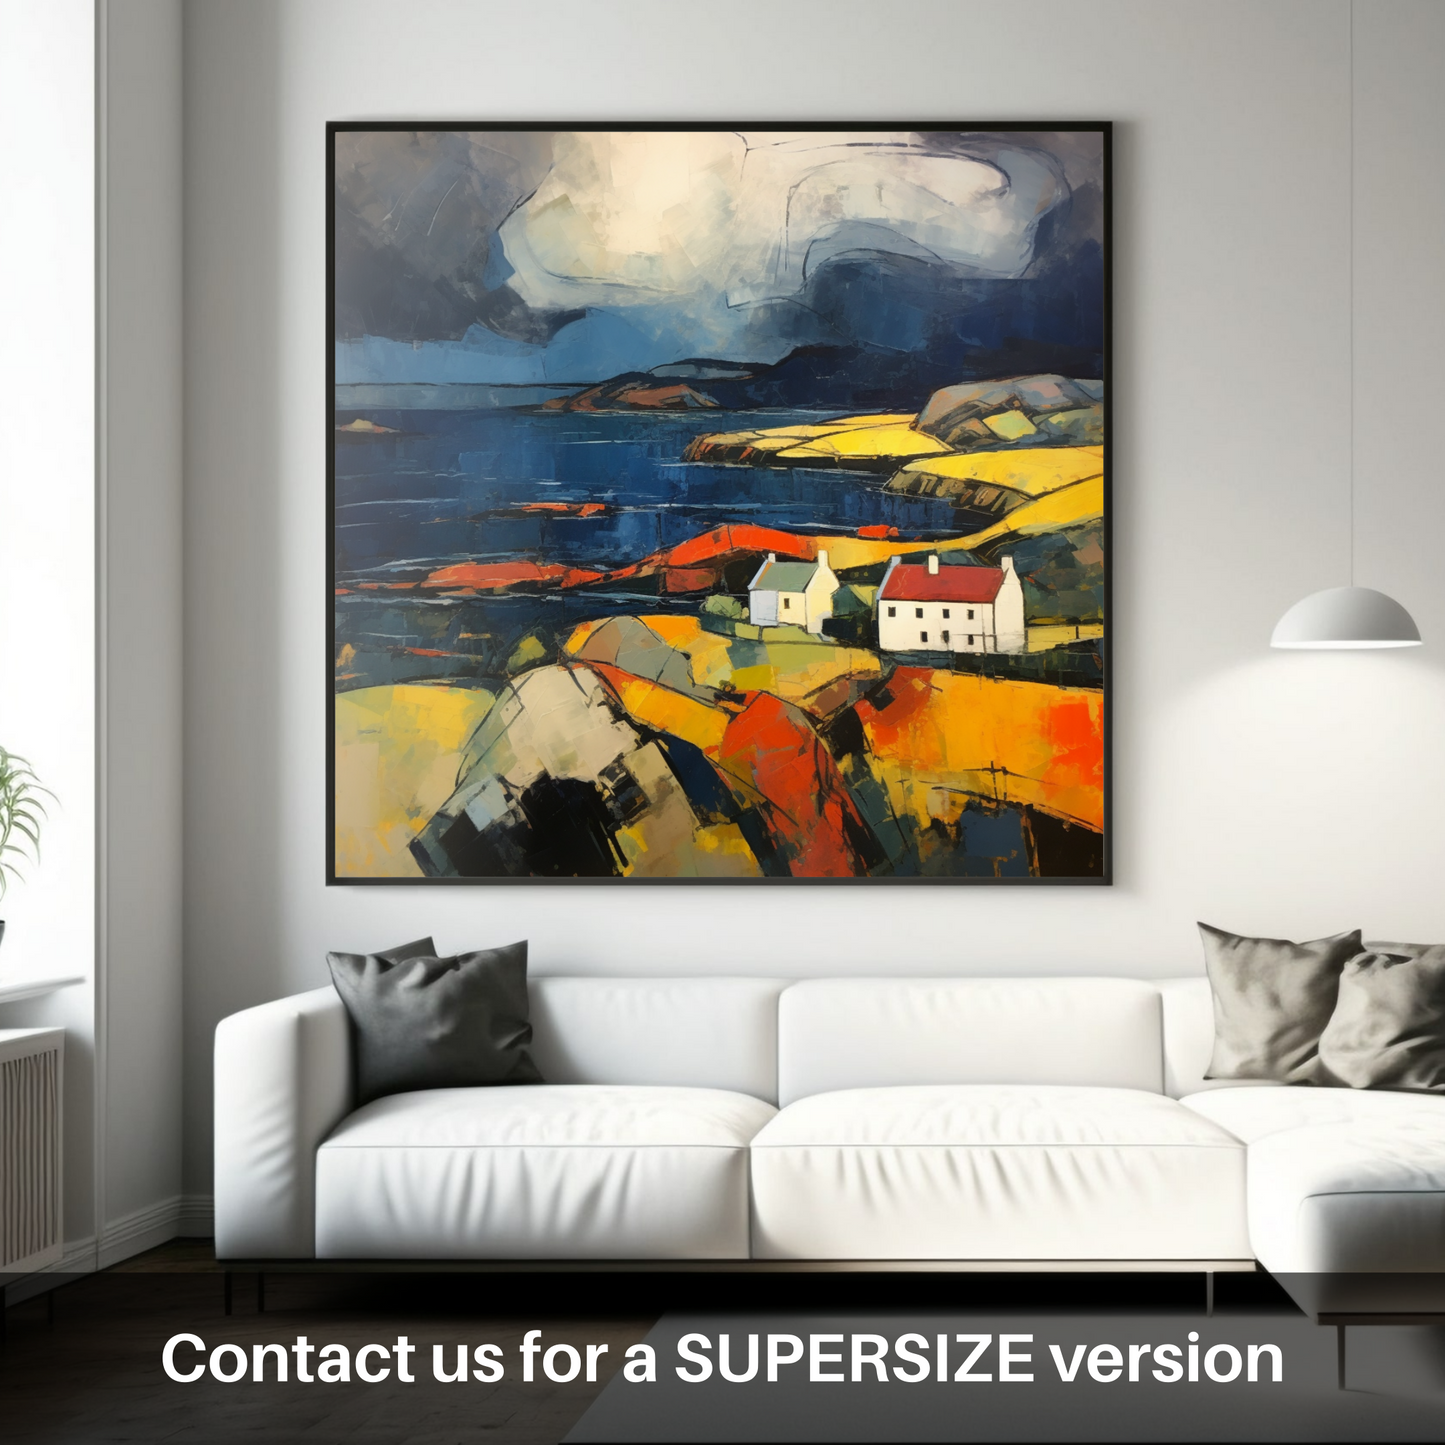 Painting and Art Print of Ardanaiseig Bay with a stormy sky. Storm Over Ardanaiseig: An Abstract Tribute to Scottish Coves.